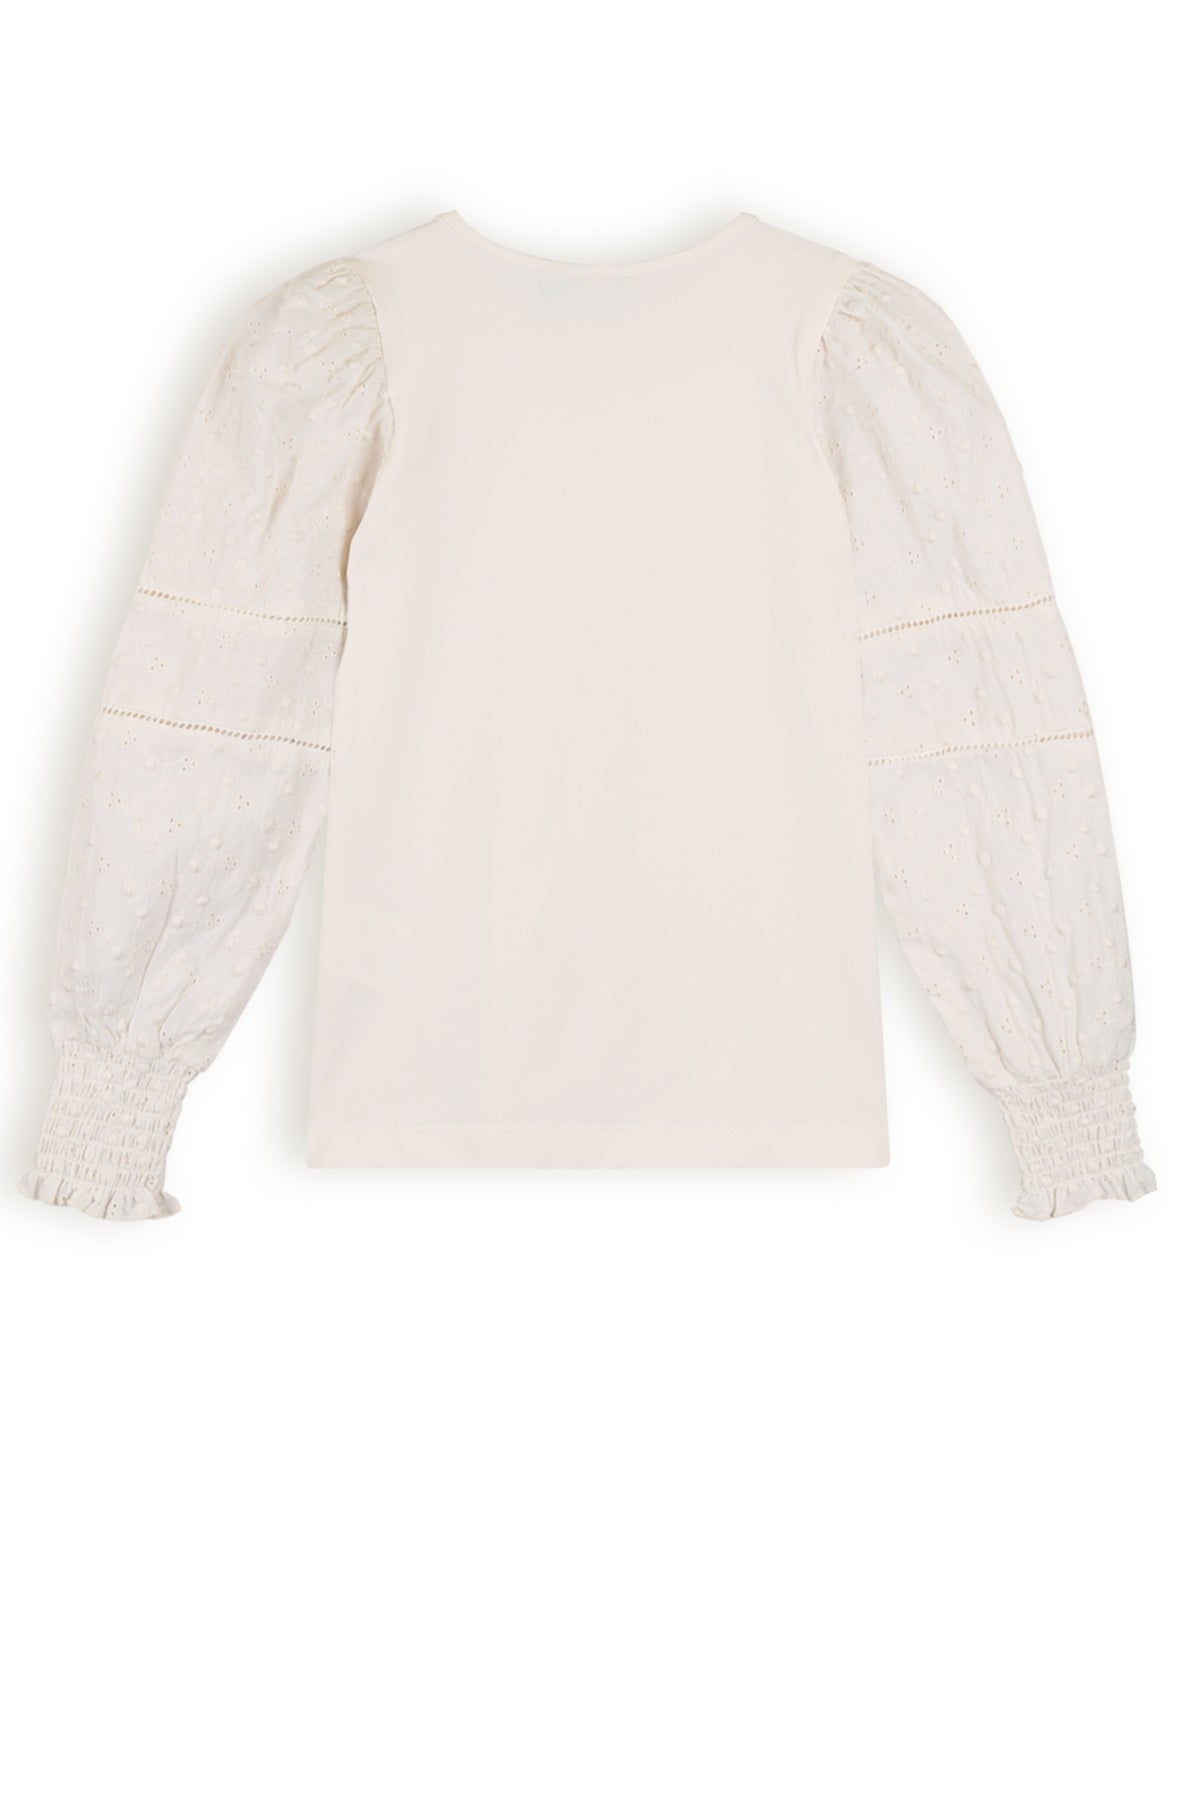 NoNo Kirza Jersey Top+ Embroidered Cotton Sleeves